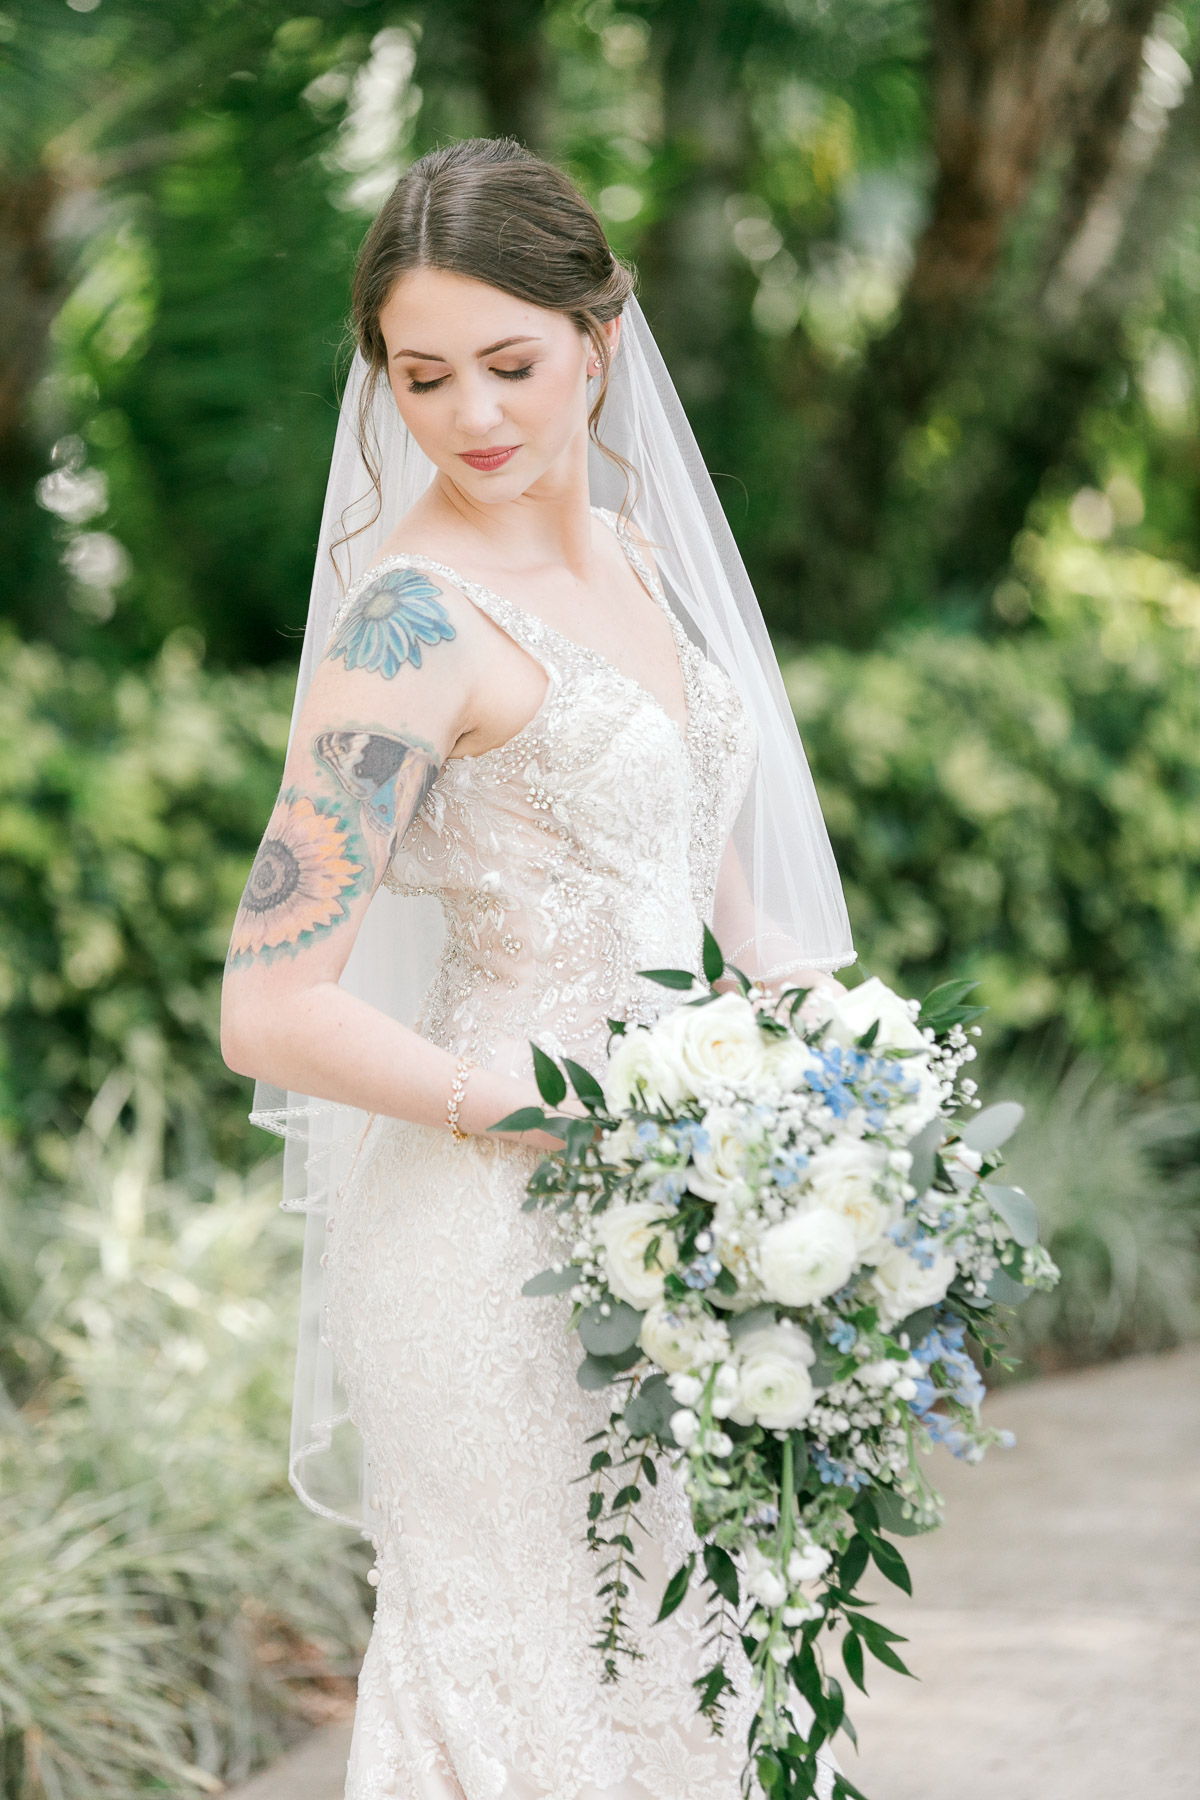 Bride and vintage wedding dress and white and blue bouquet